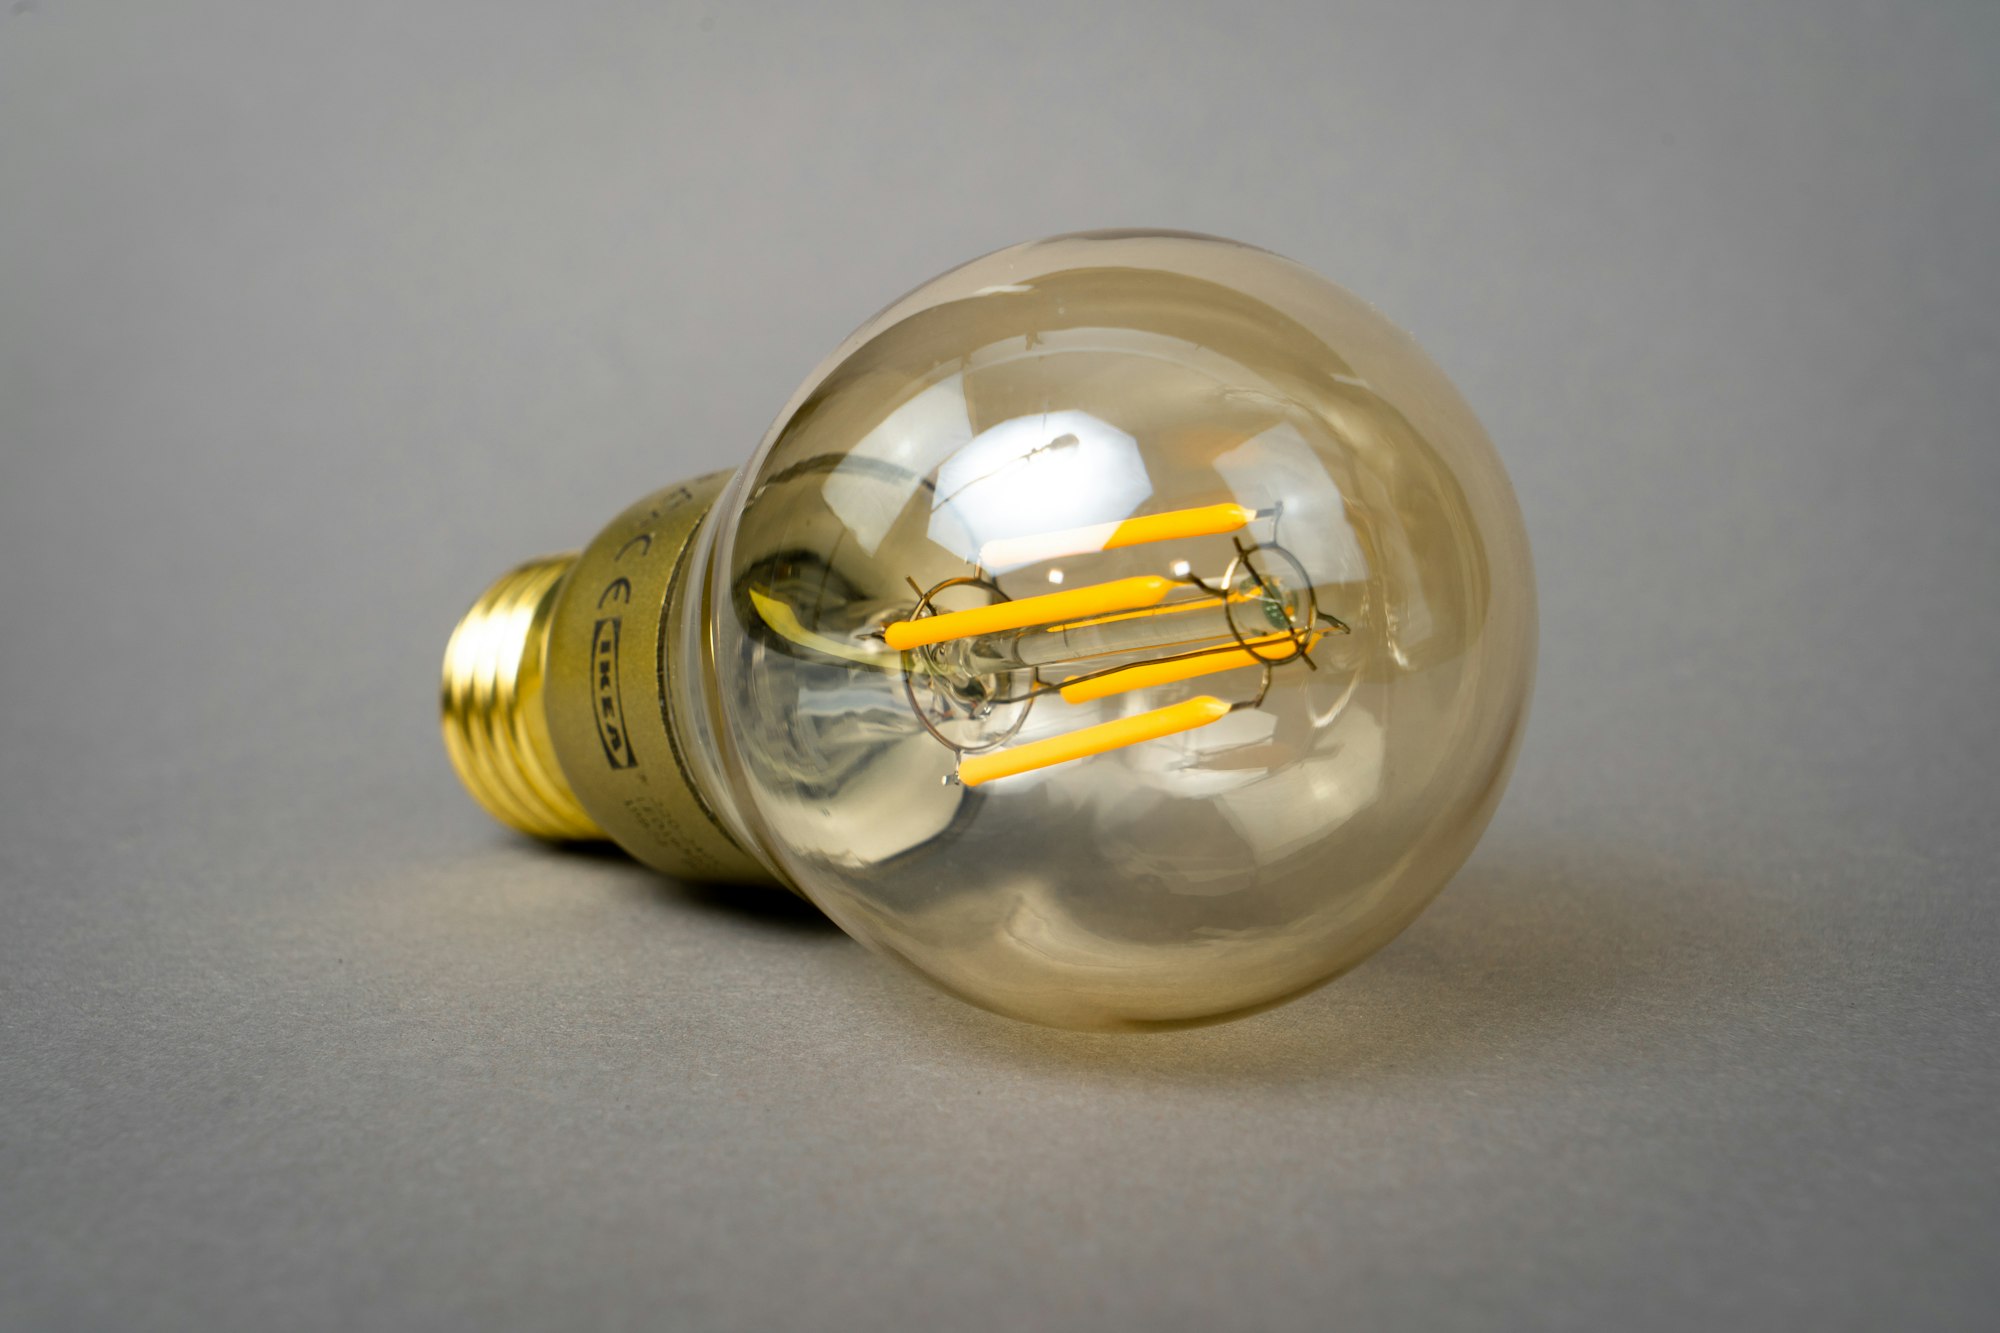 a retro lamp with LED filament to get the look of ancient filament bulbs.